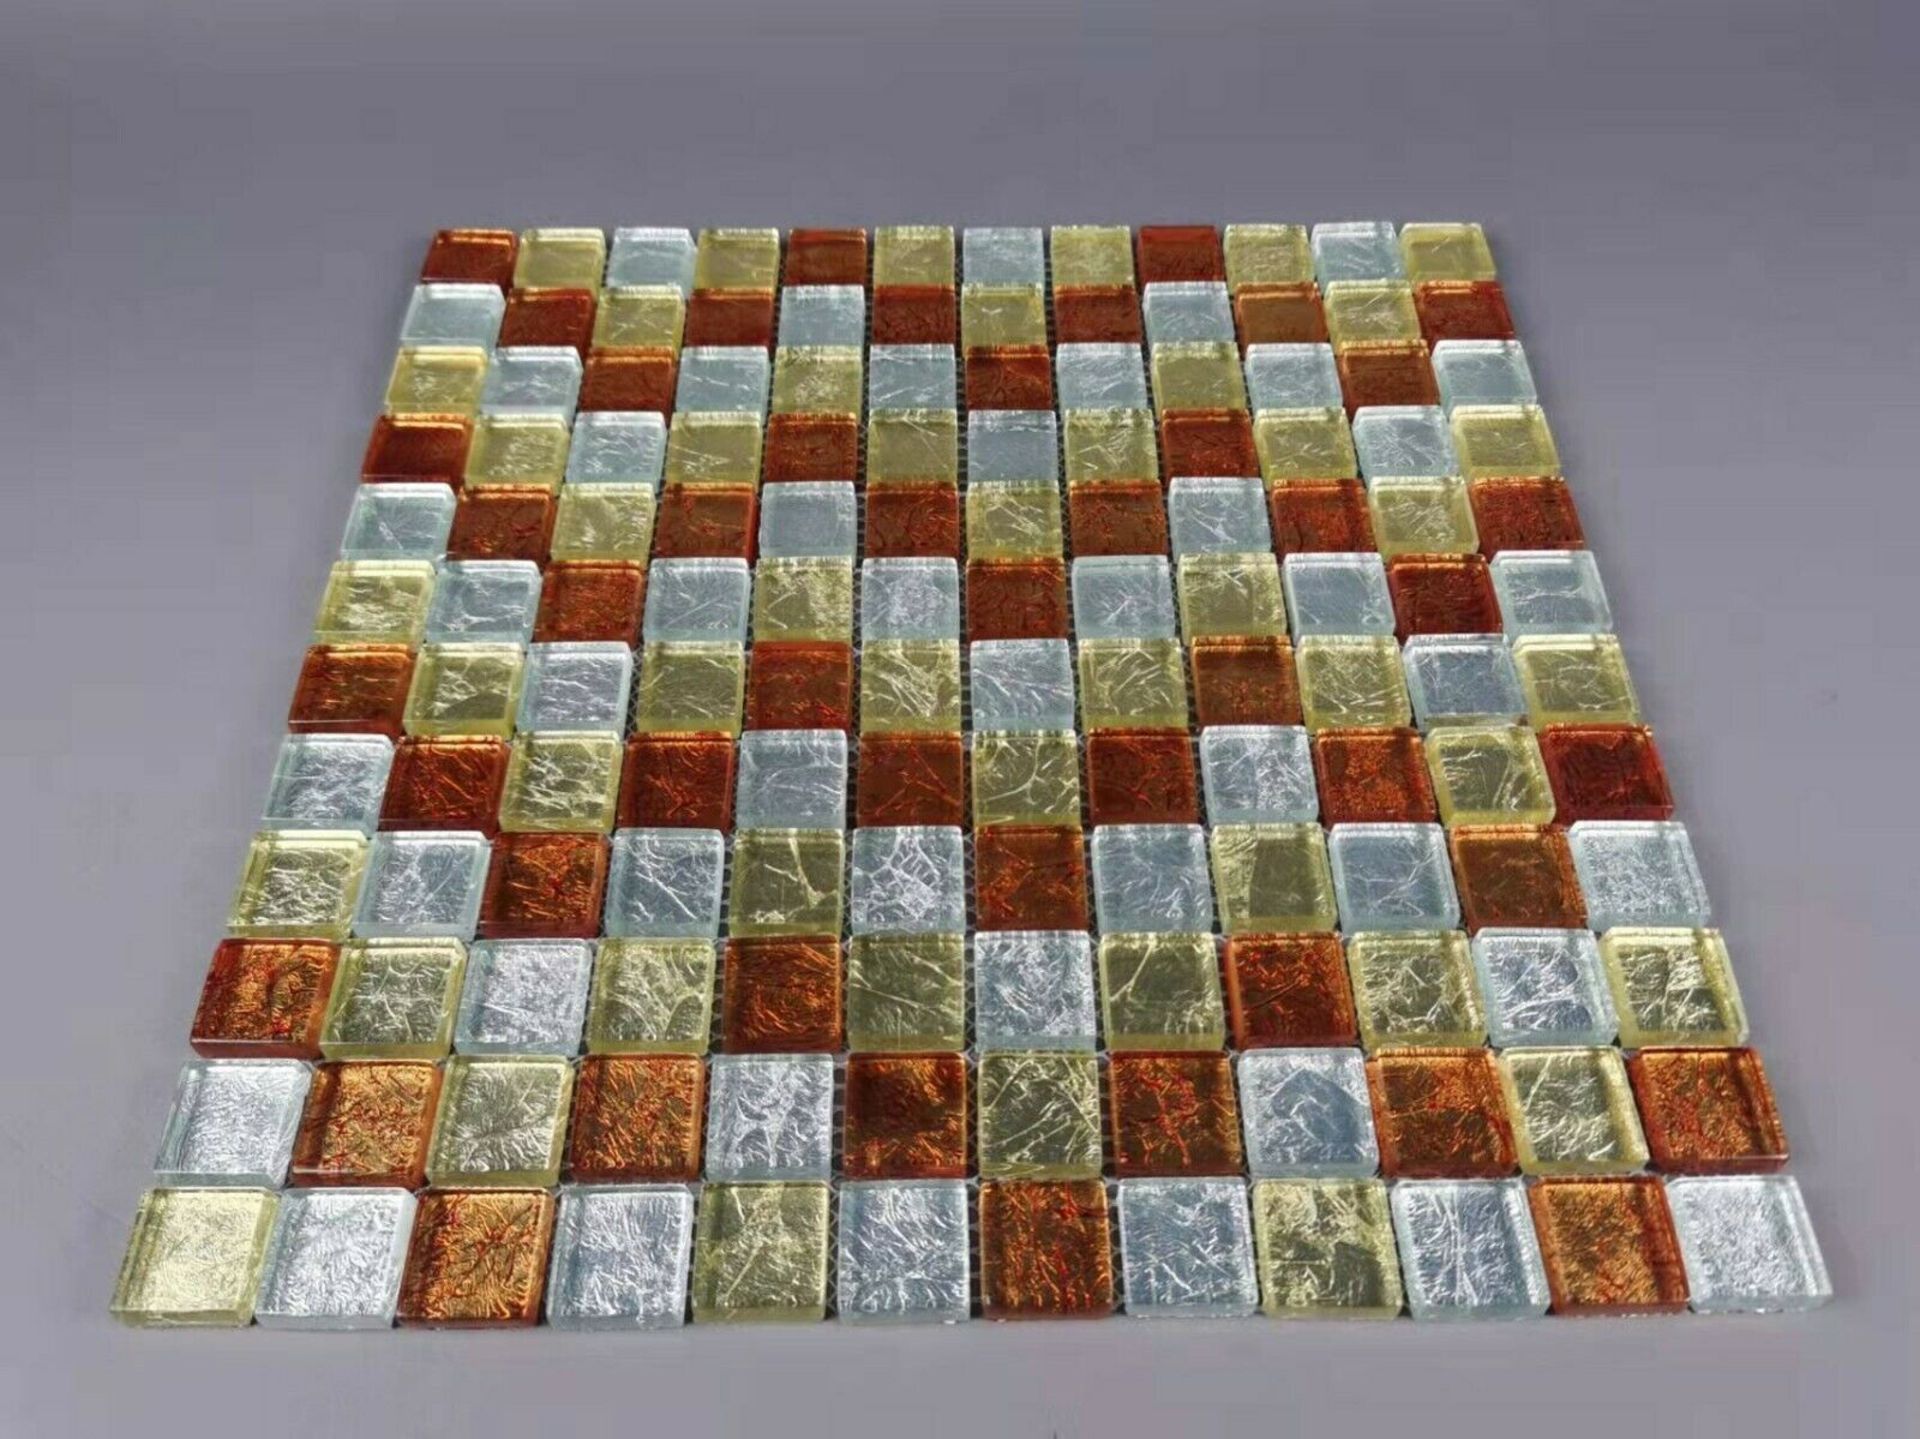 2 Square Metres - High Quality Glass/Stainless Steel Mosaic Tiles - Image 3 of 4